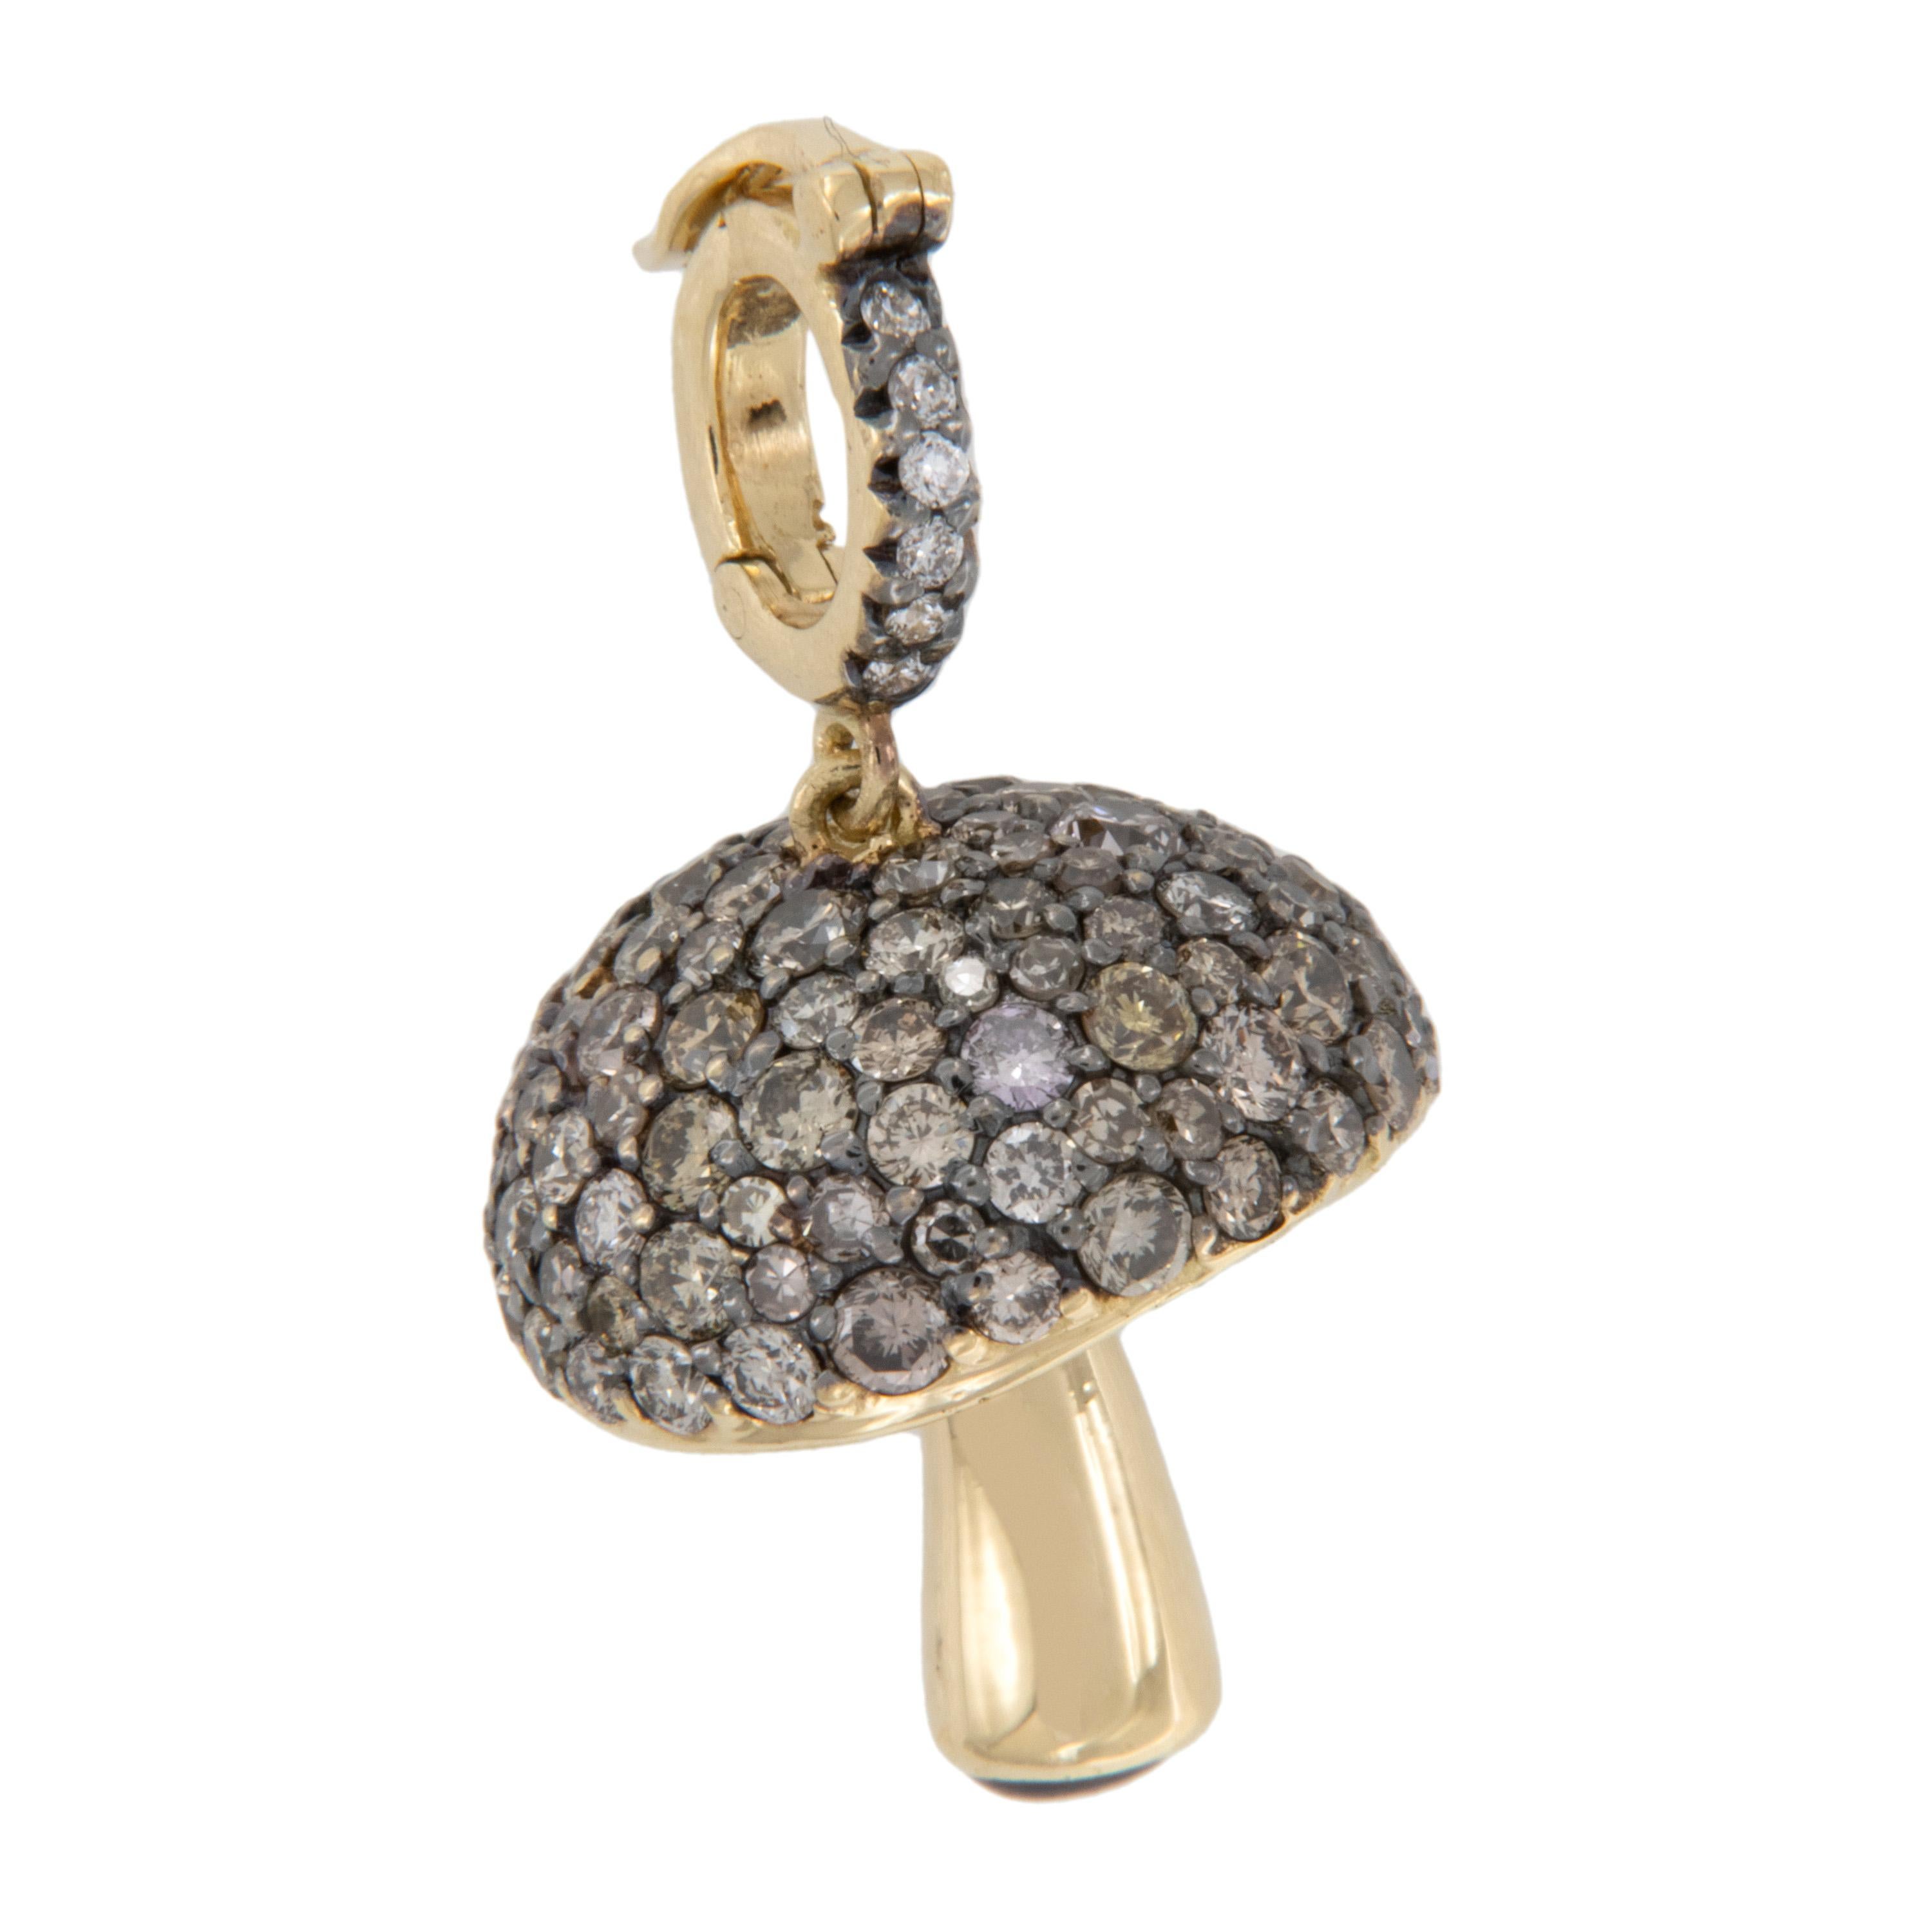 Crafted in rich 18 karat yellow gold this sweet mushroom is encrusted with 2.00 Cttw Fancy Gray diamond accented with black rhodium for a striking look! White diamonds accent the bail which is hinged making it easy to wear with your favorite chain